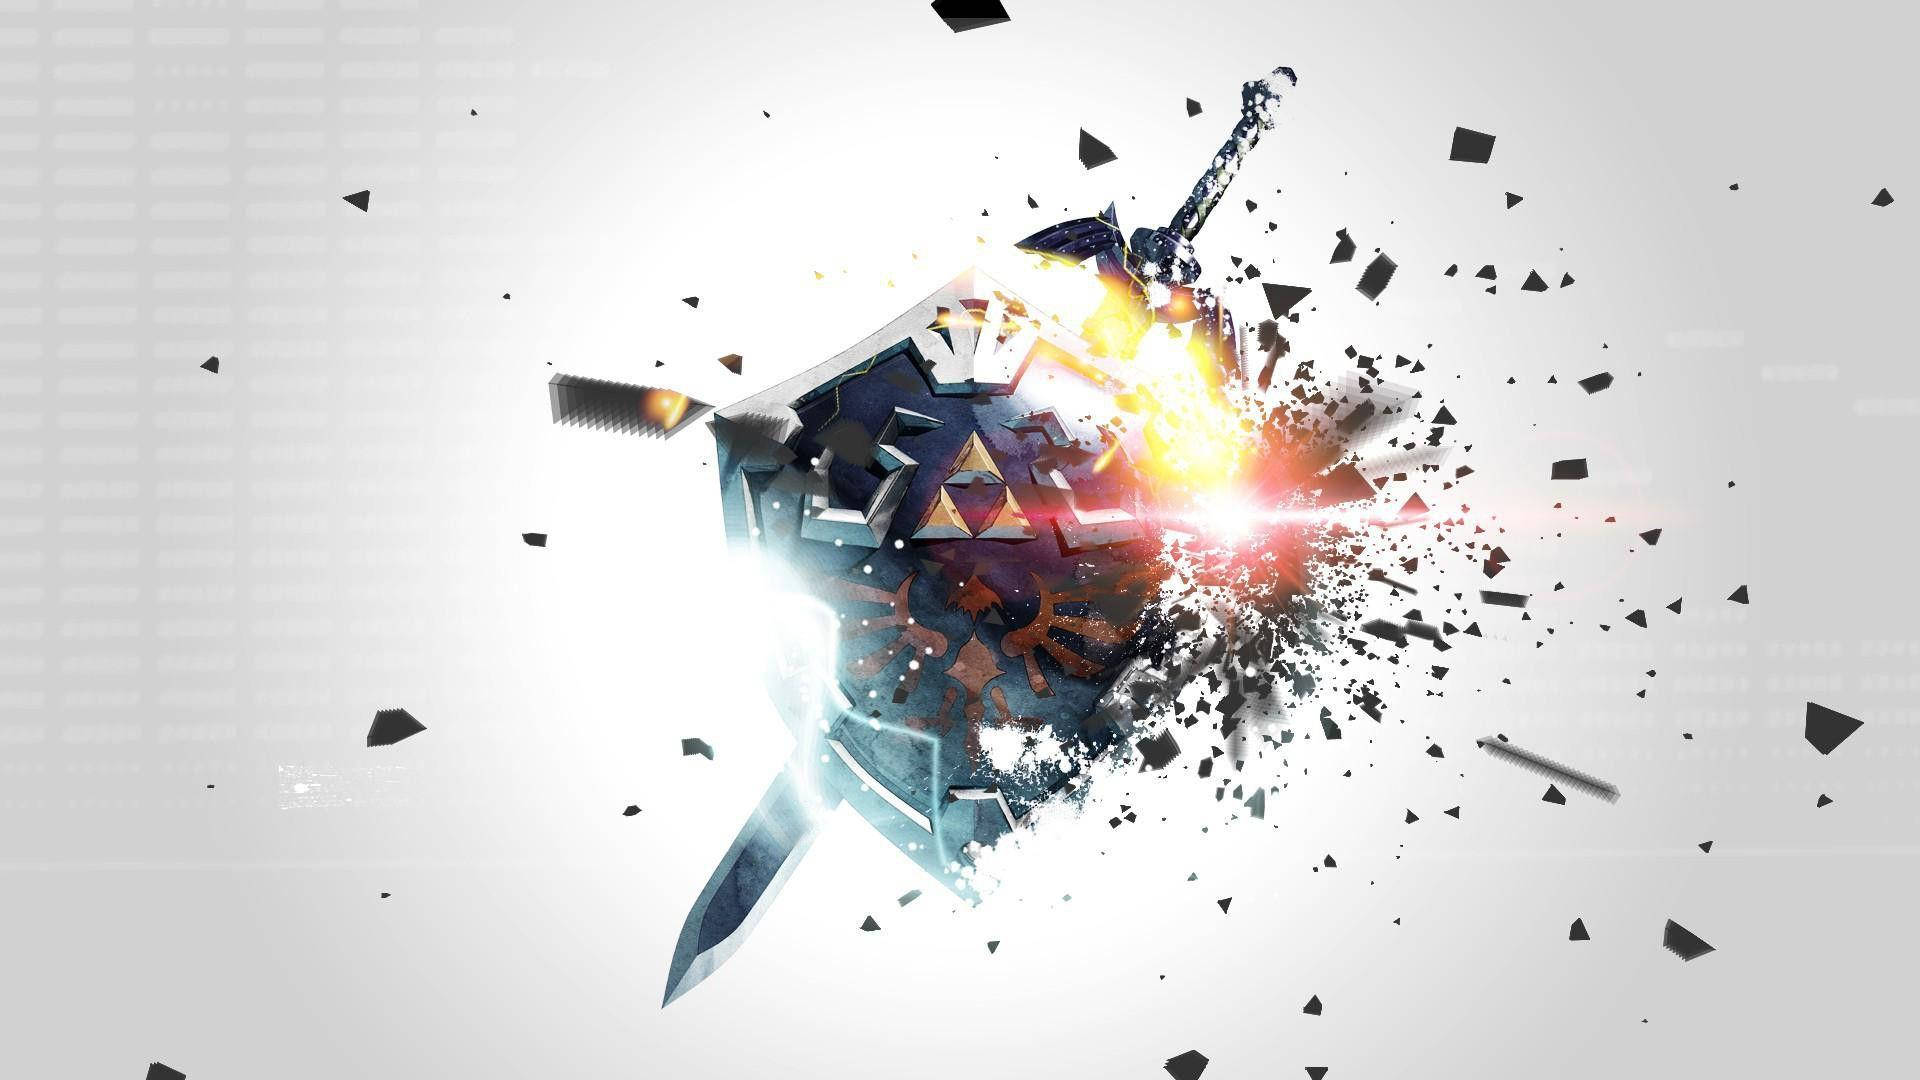 Link striking a heroic pose while brandishing his signature weapons, the Hylian shield and Master Sword. Wallpaper